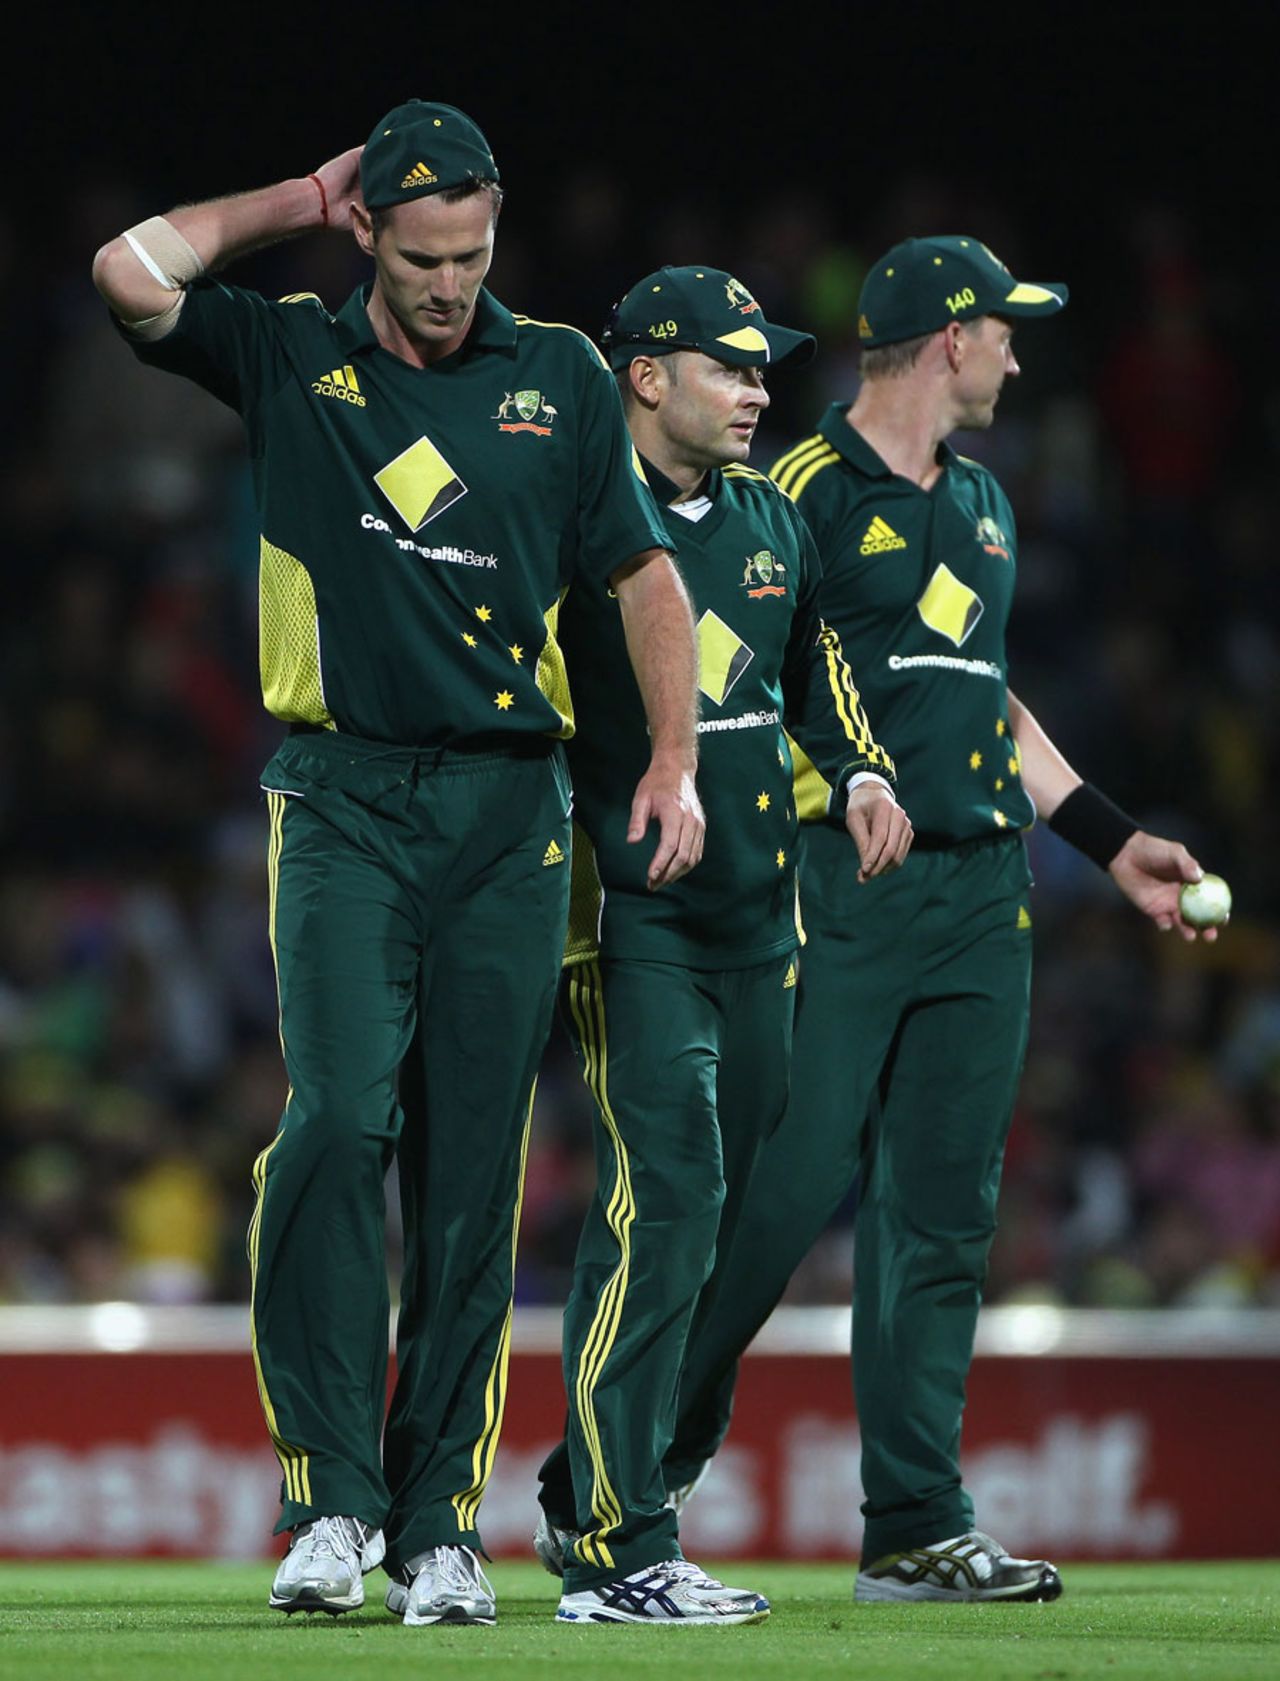 A dejected Shaun Tait walks off after injuring his groin midway through an over, Australia v England, 2nd ODI, Hobart, January 21, 2011